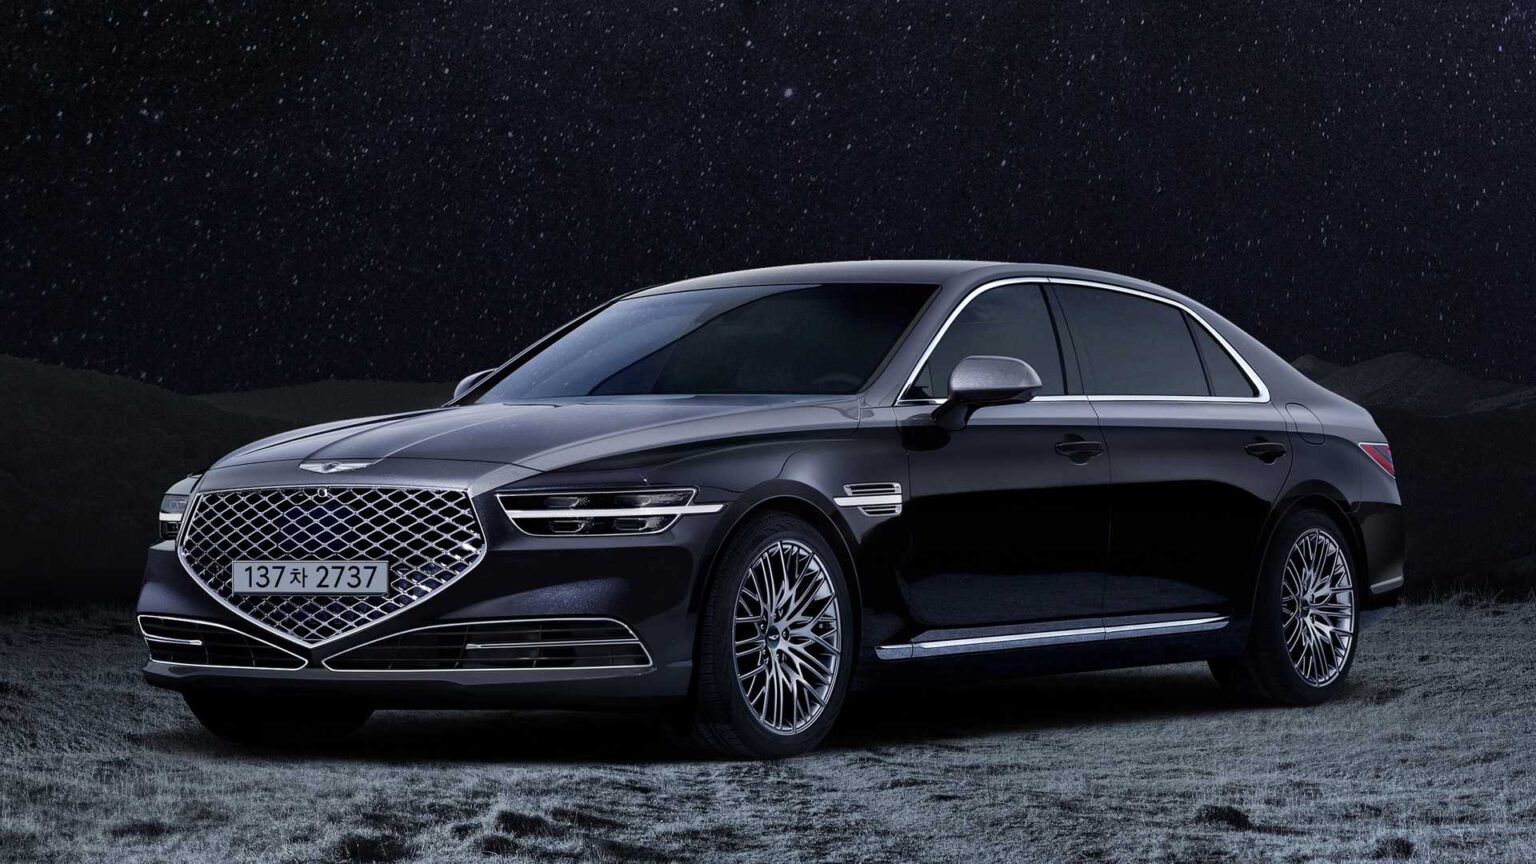 Genesis G90 Stardust Edition sends the elegance to another level